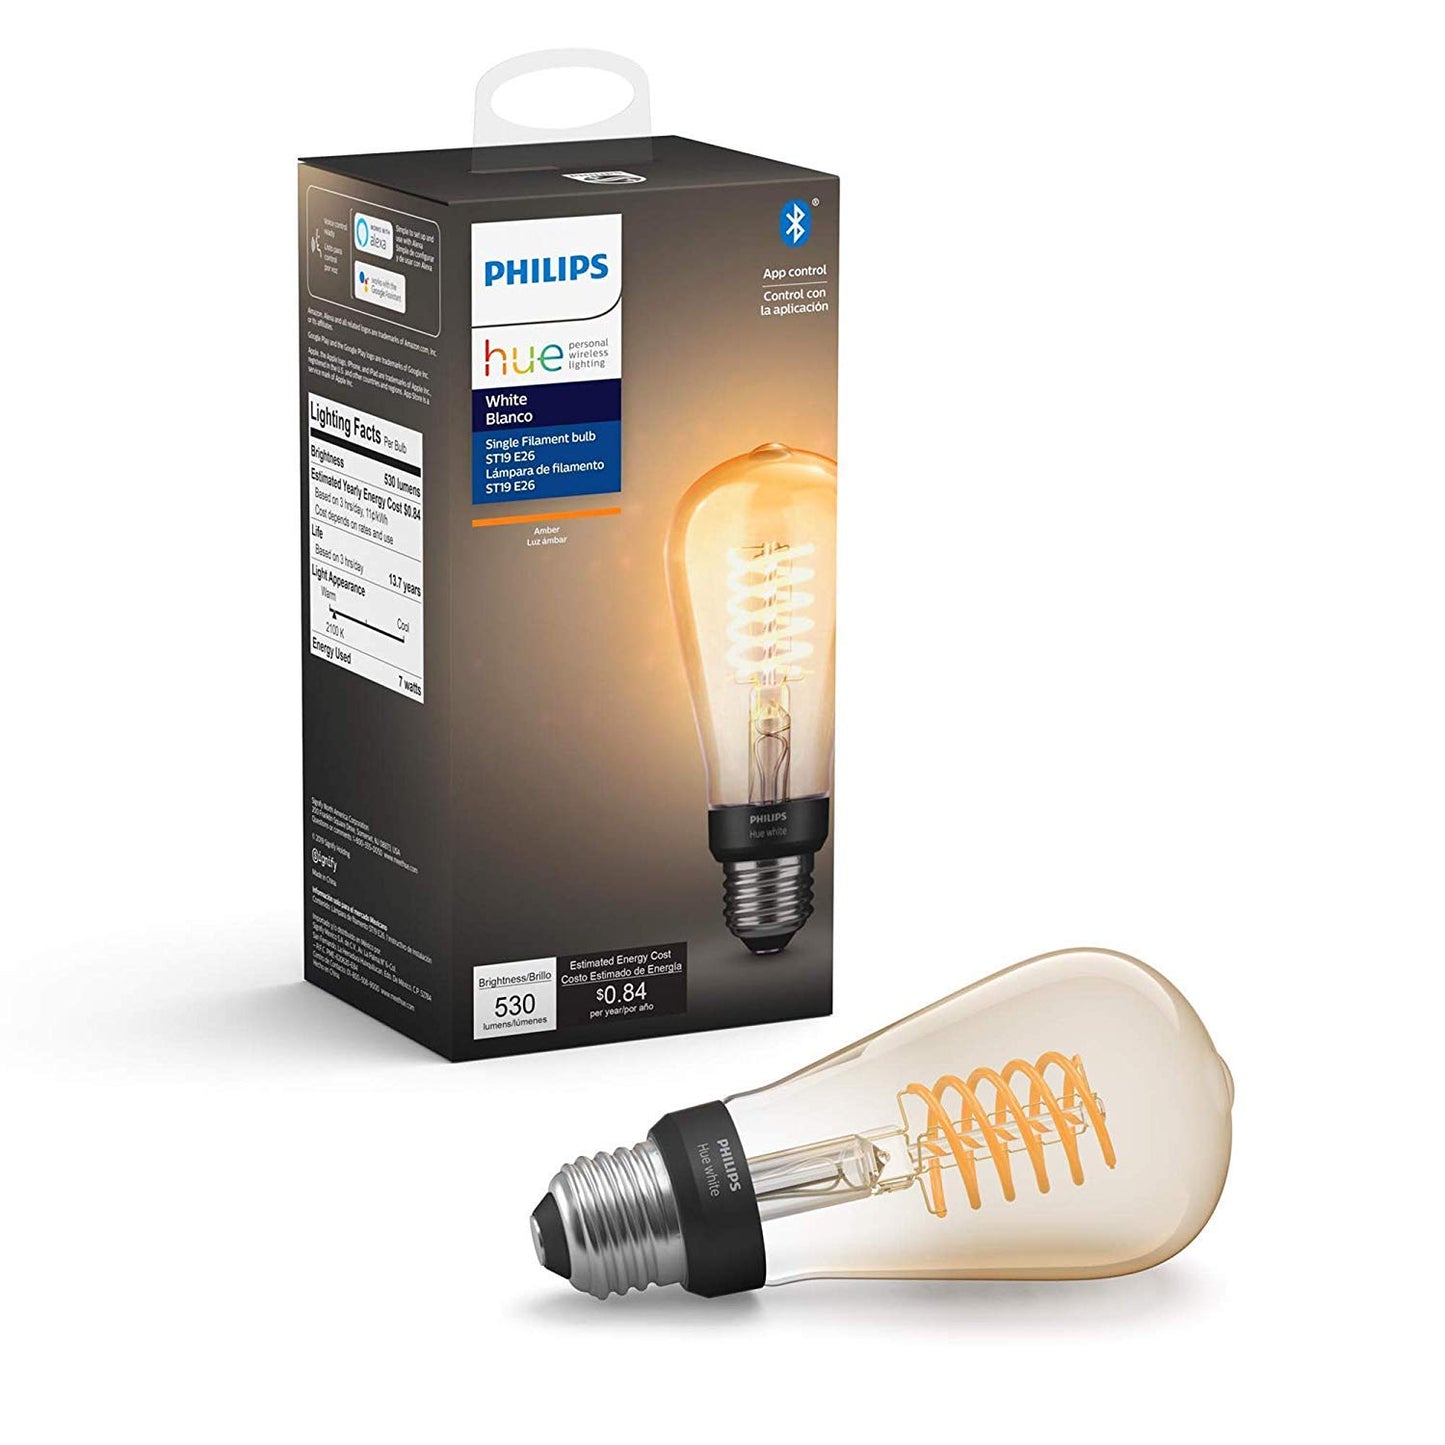 Philips Hue White Ambiance Dimmable Smart Filament ST23, Warm-White to Cool-White LED Vintage Edison Bulb, Bluetooth & Hub Compatible (Hue Hub Optional), Voice Activated with Alexa, 4-Pack